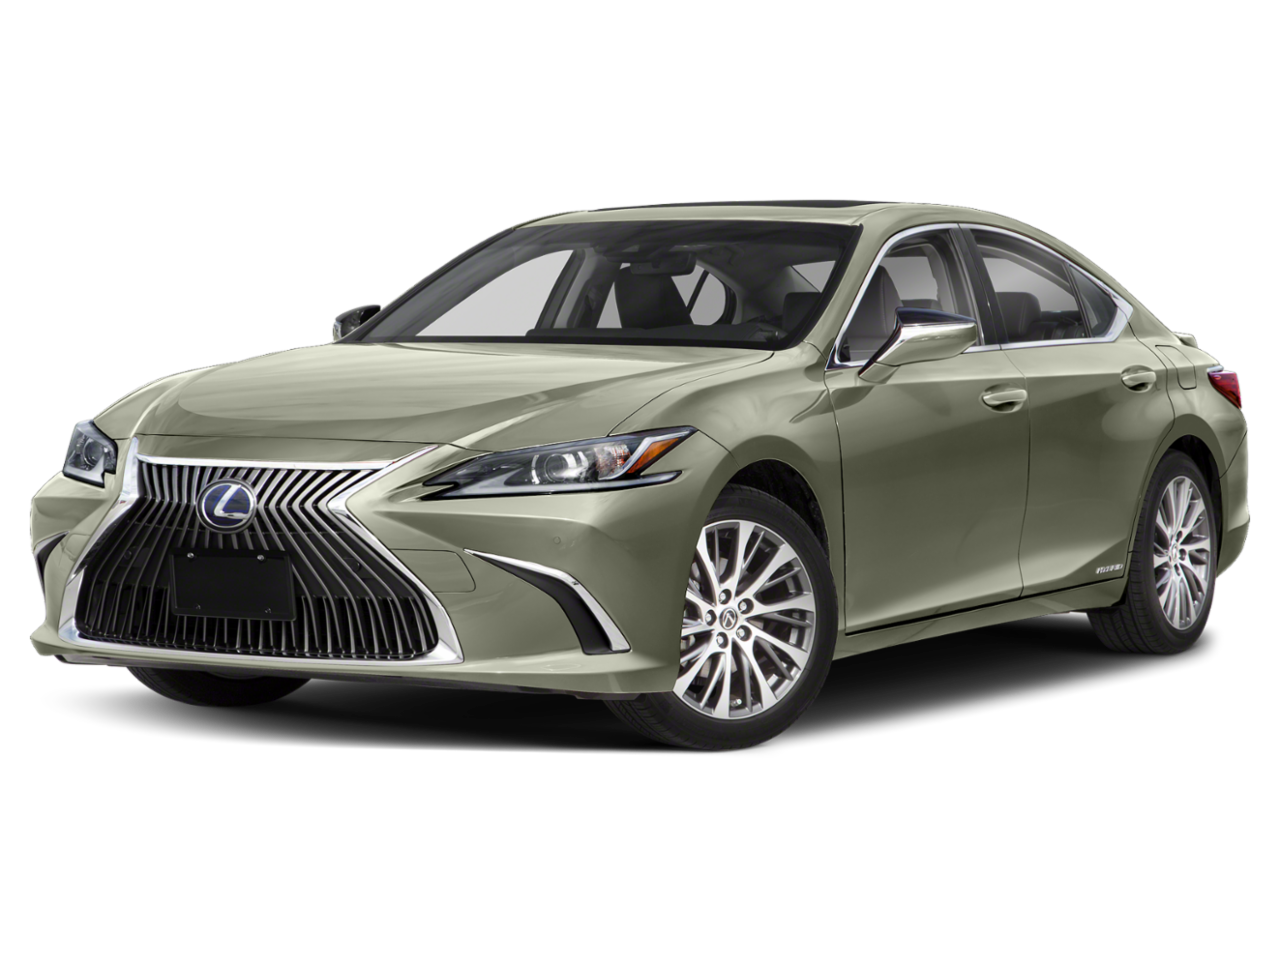 2021 Lexus ES lease $1059 Mo $0 Down Leases Available